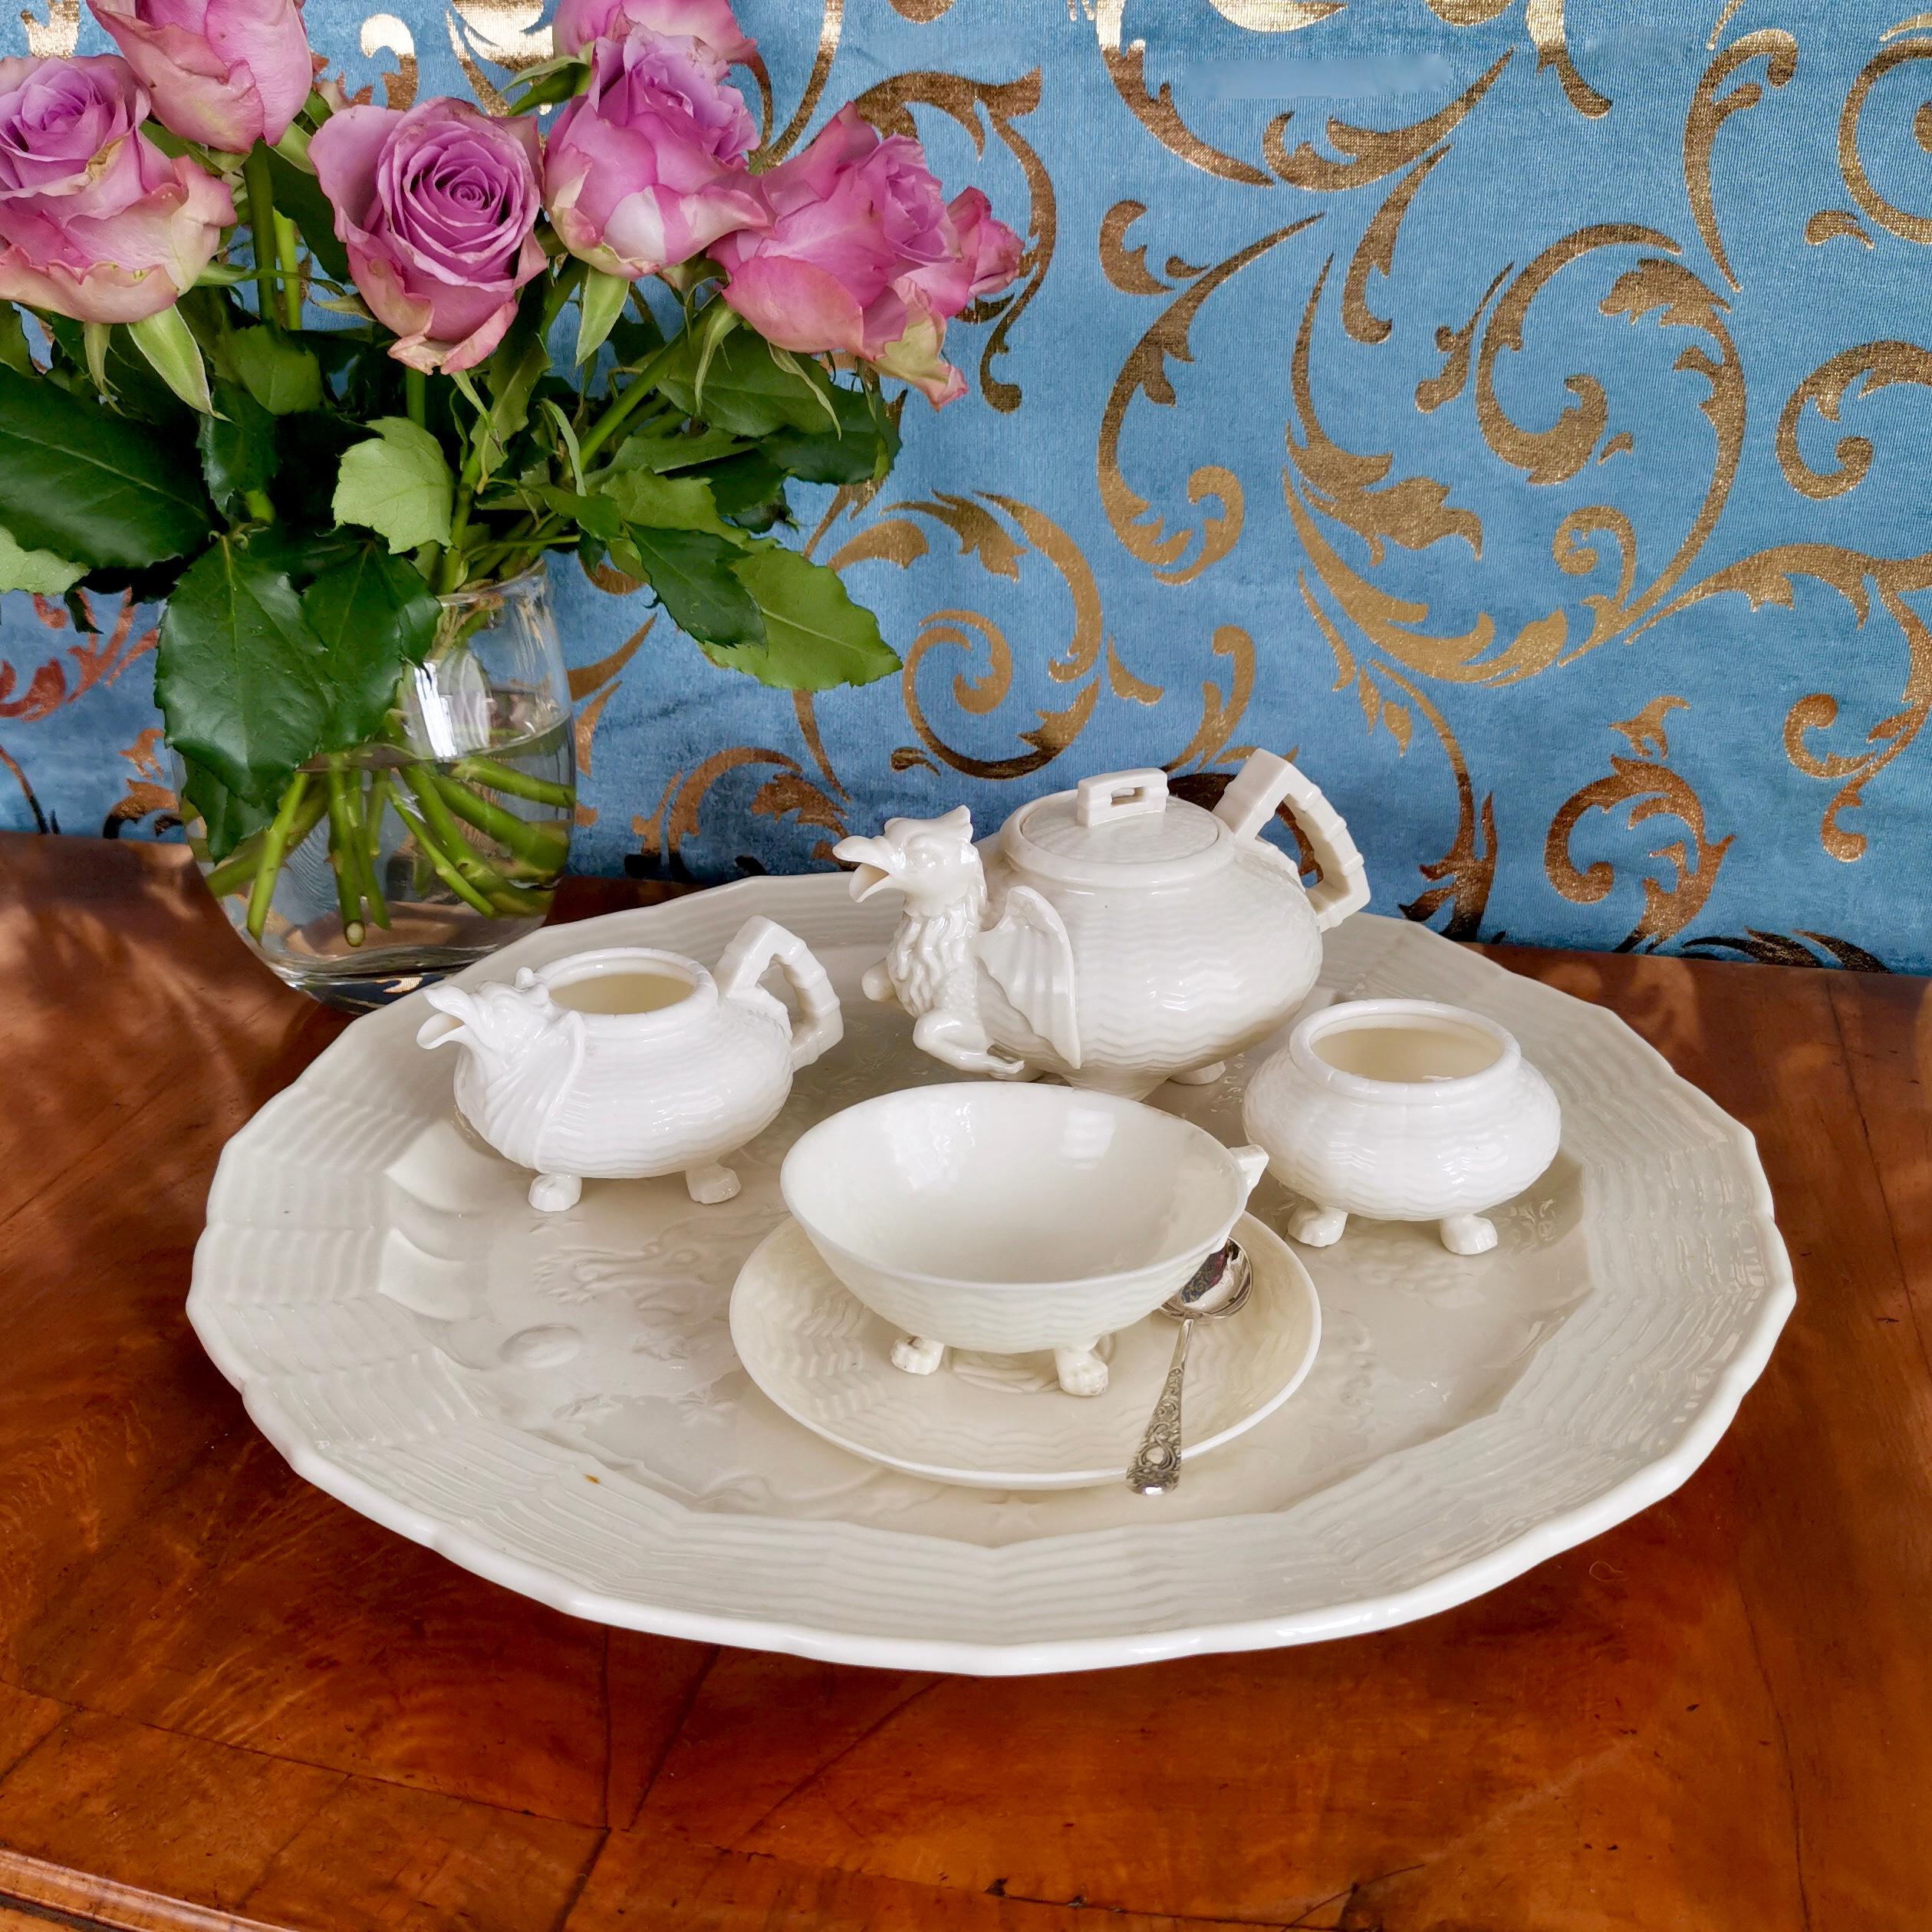 This is an extremely rare and stunning Belleek cabaret set serving just one, in the 